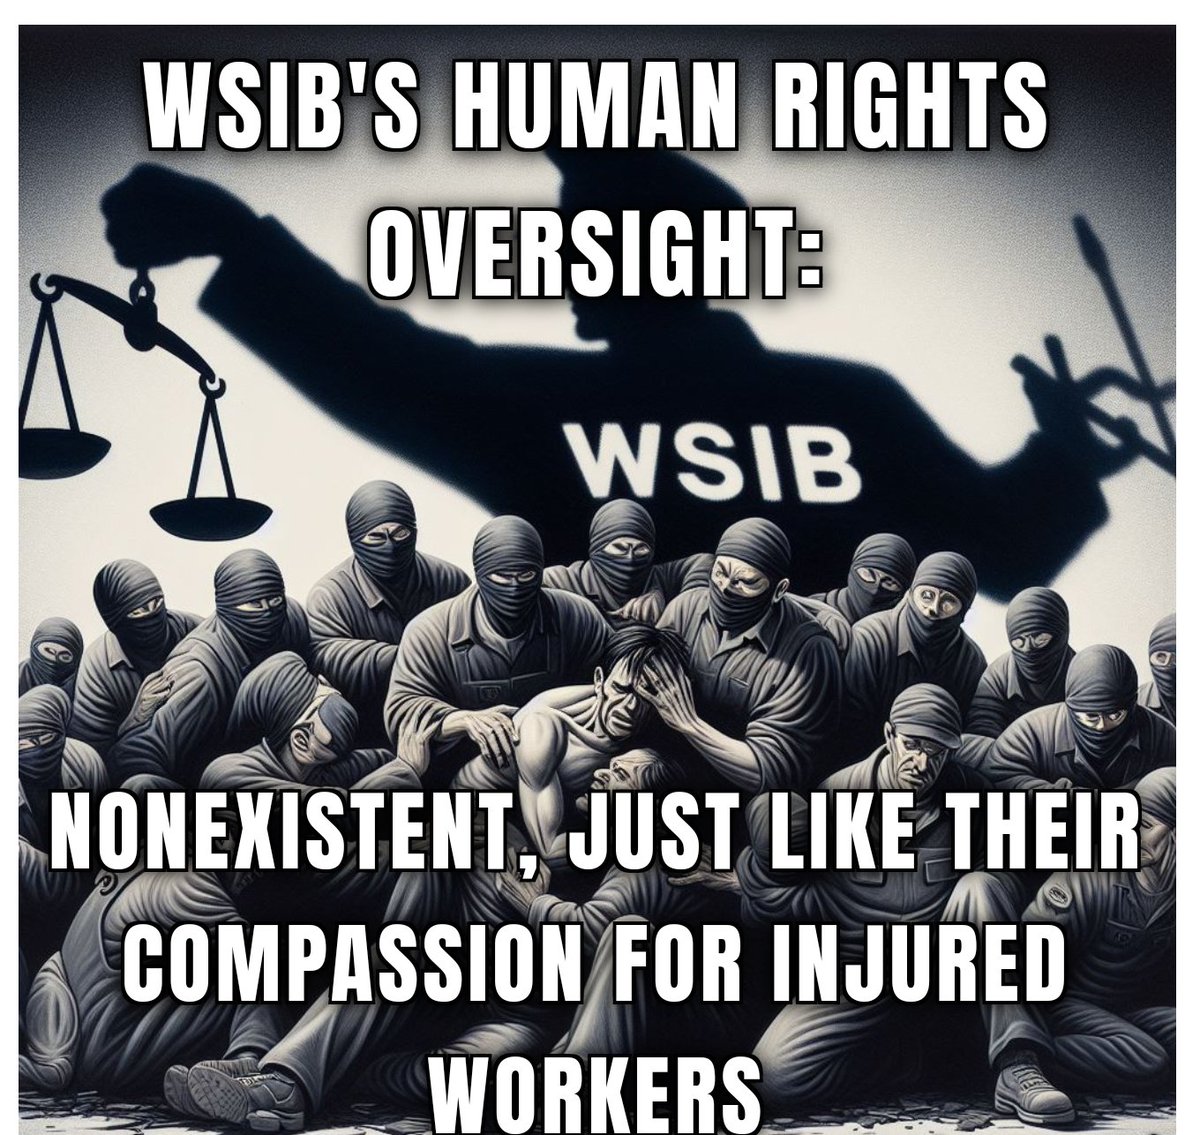 WSIB's human rights oversight: nonexistent! Just like their compassion for injured workers.
 It's time for accountability and change! #InjuredWorkers #HumanRights #Accountability